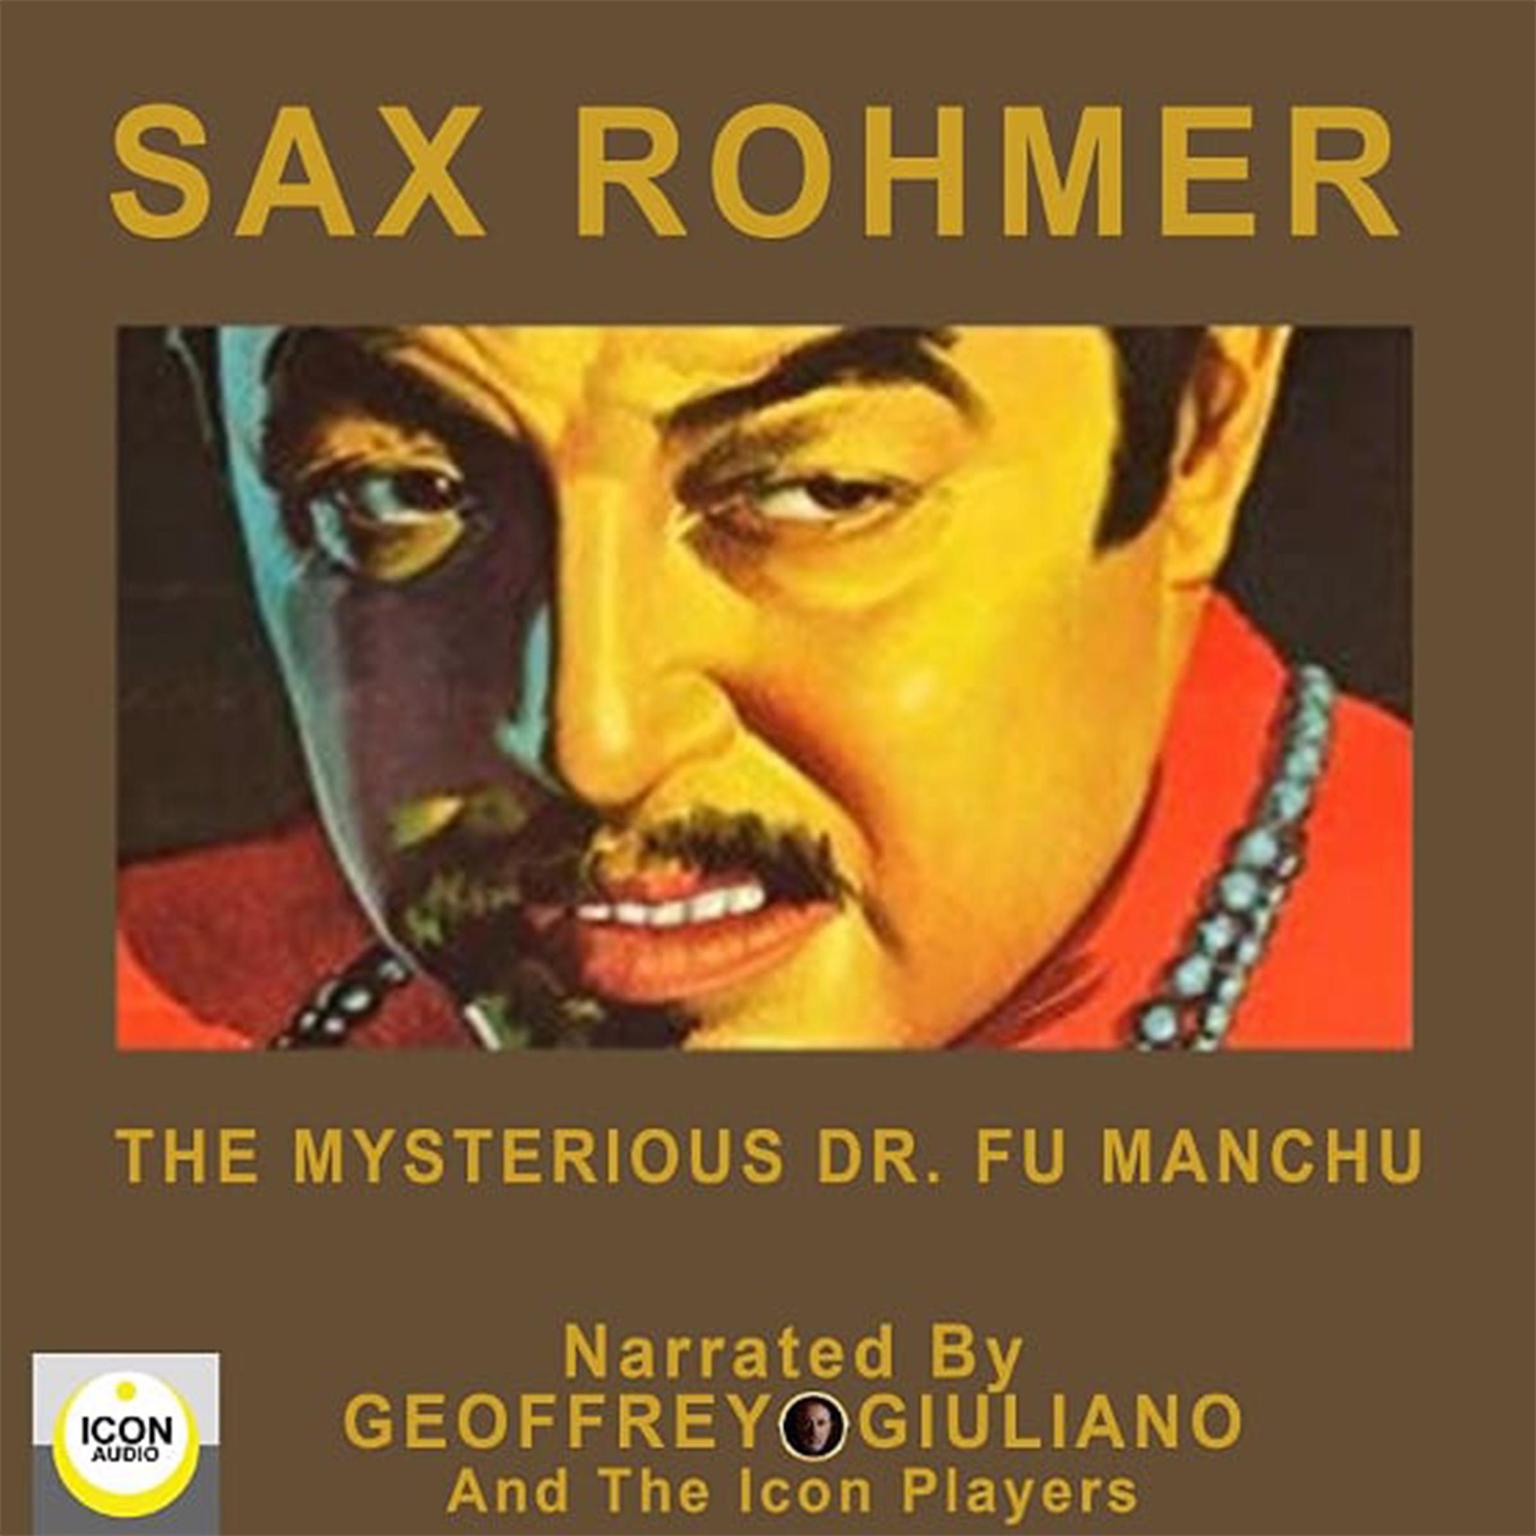 The Mysterious Dr. Fu Manchu Audiobook, by Sax Rohmer